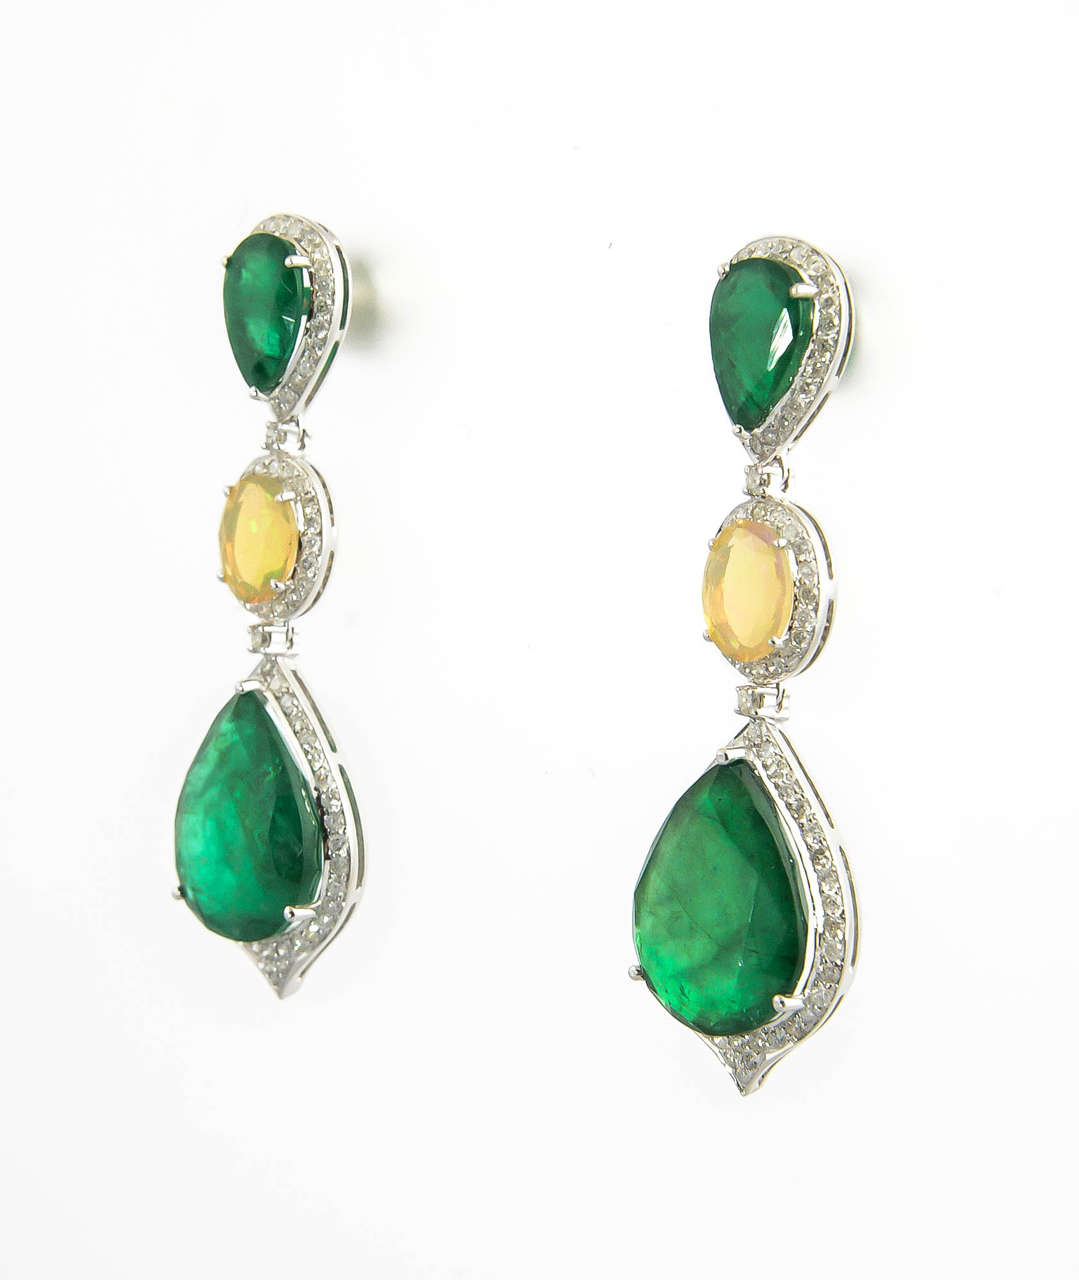 These earring are beautiful on the ear.  The emerald and opals hang in diamond frames mounted in 18k white gold.  The earrings have a post back.